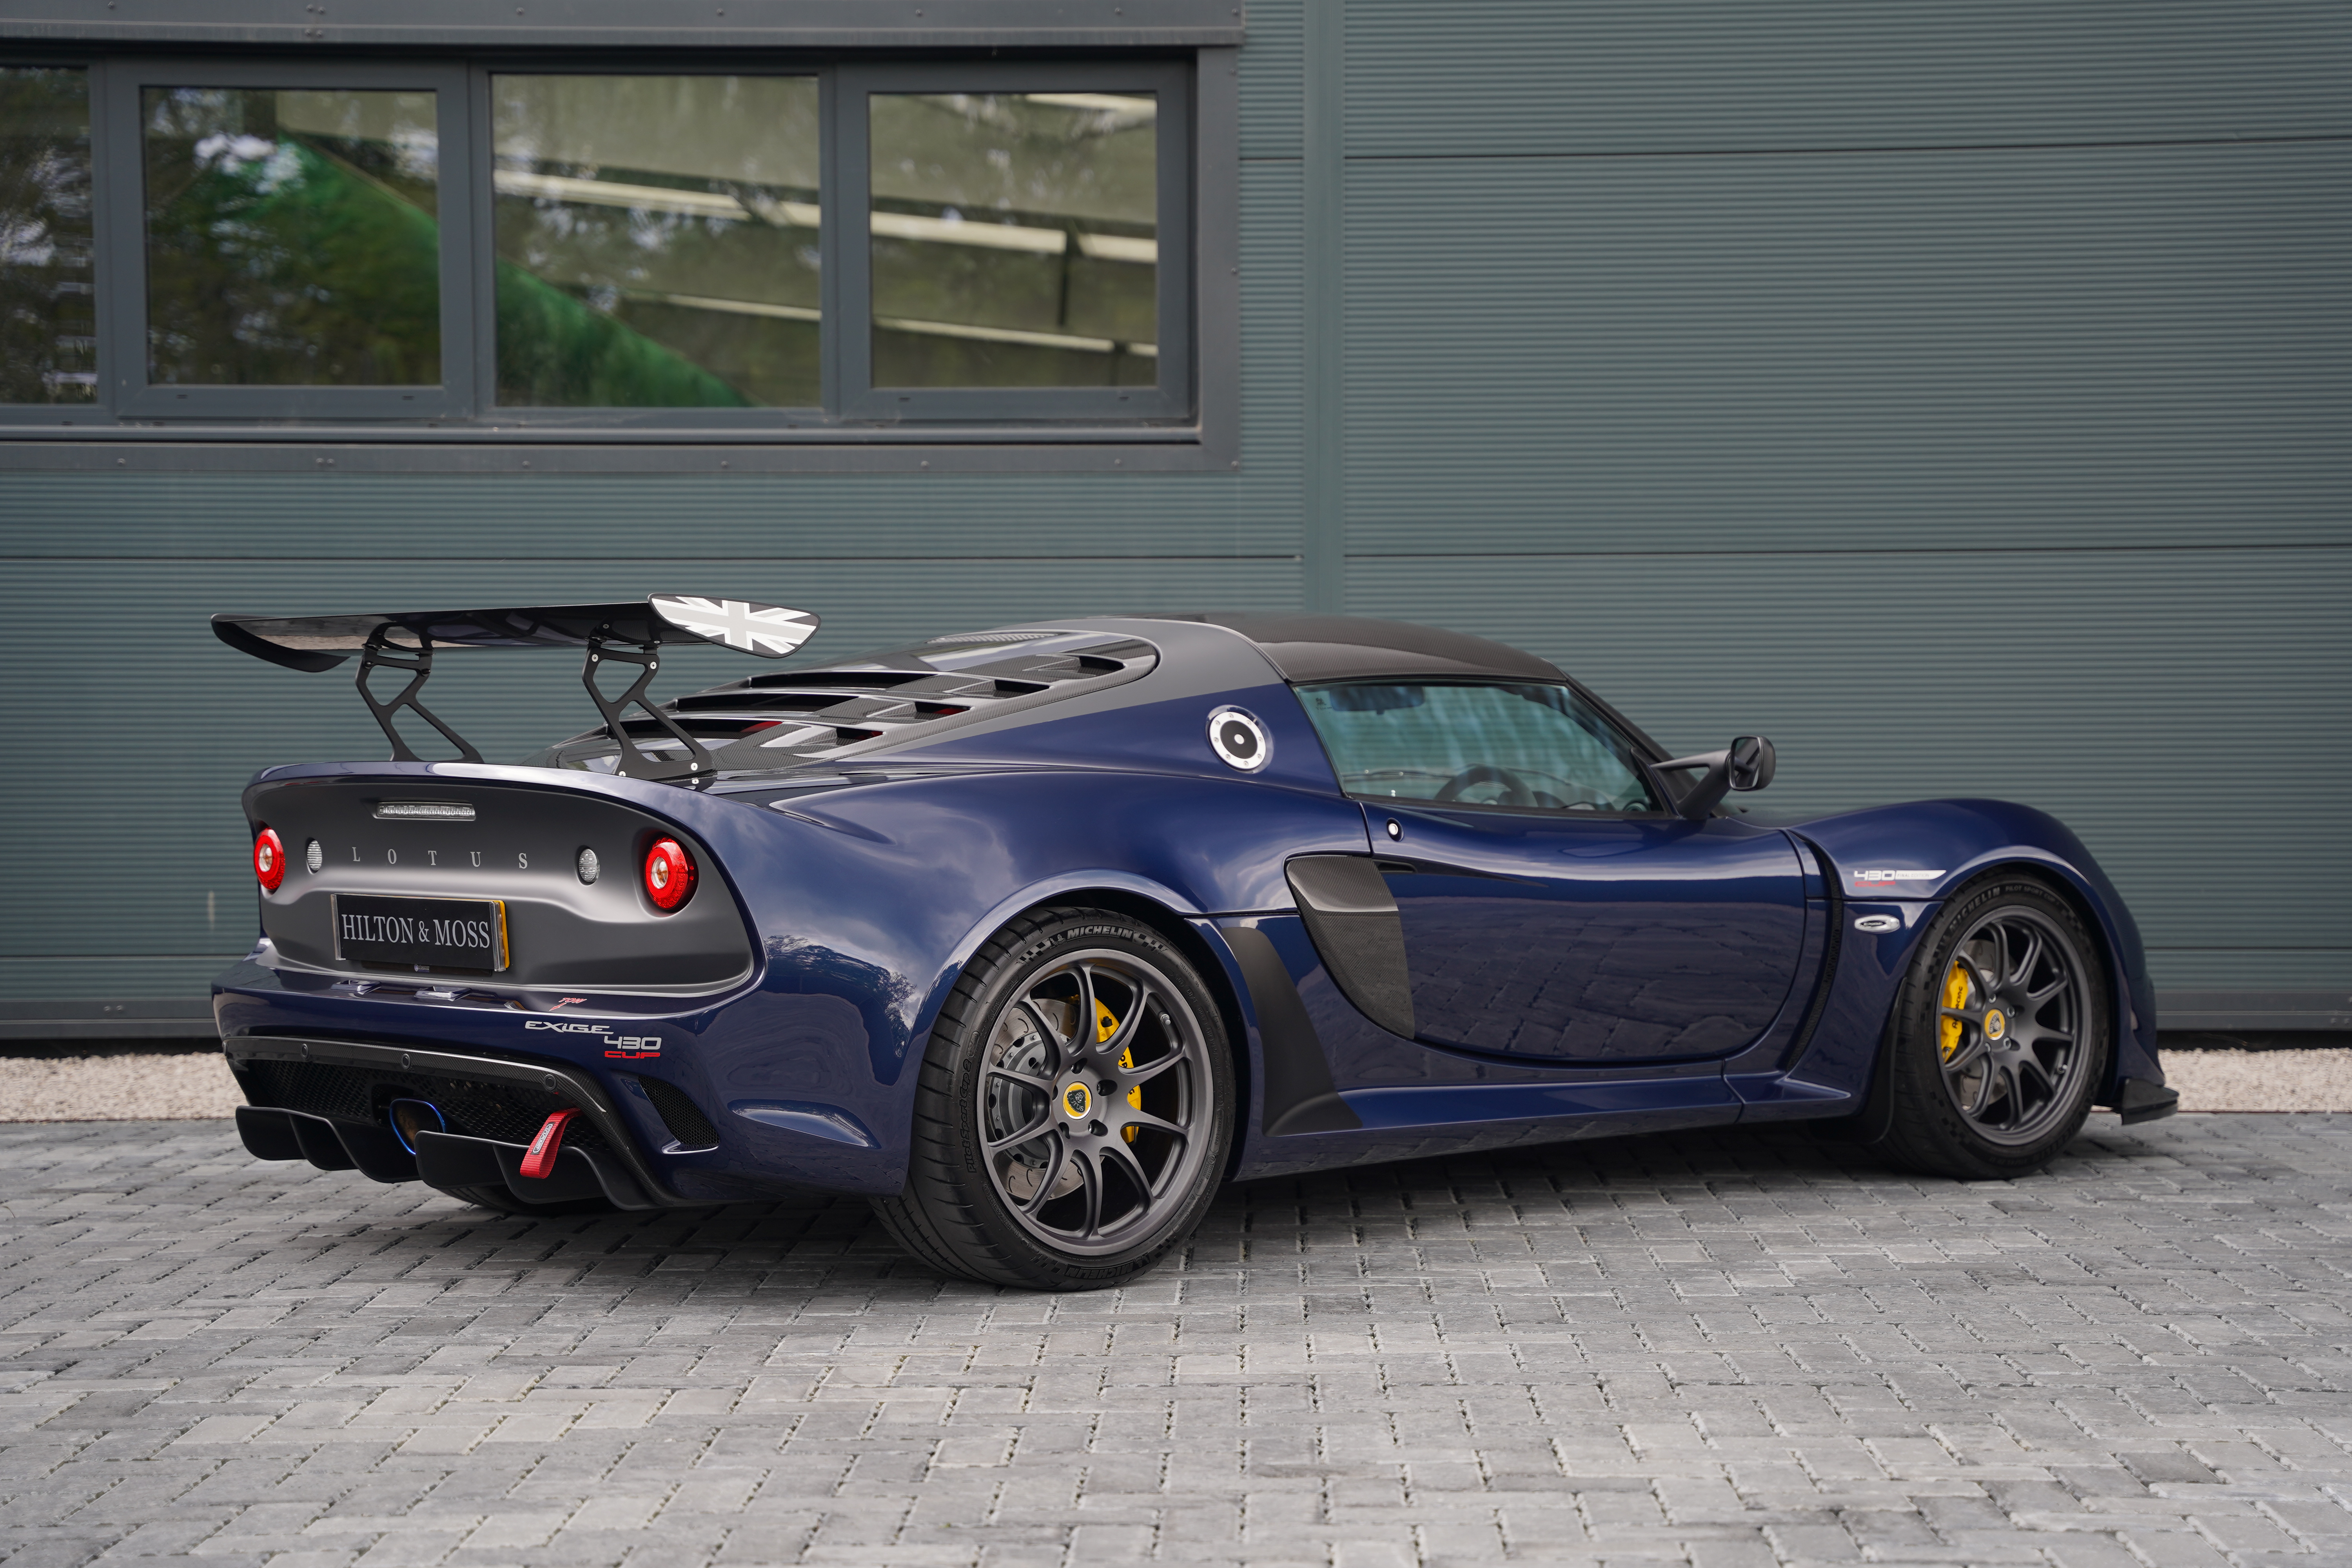 2021 Lotus Exige CUP 430 Final Edition Previously Sold | Hilton & Moss